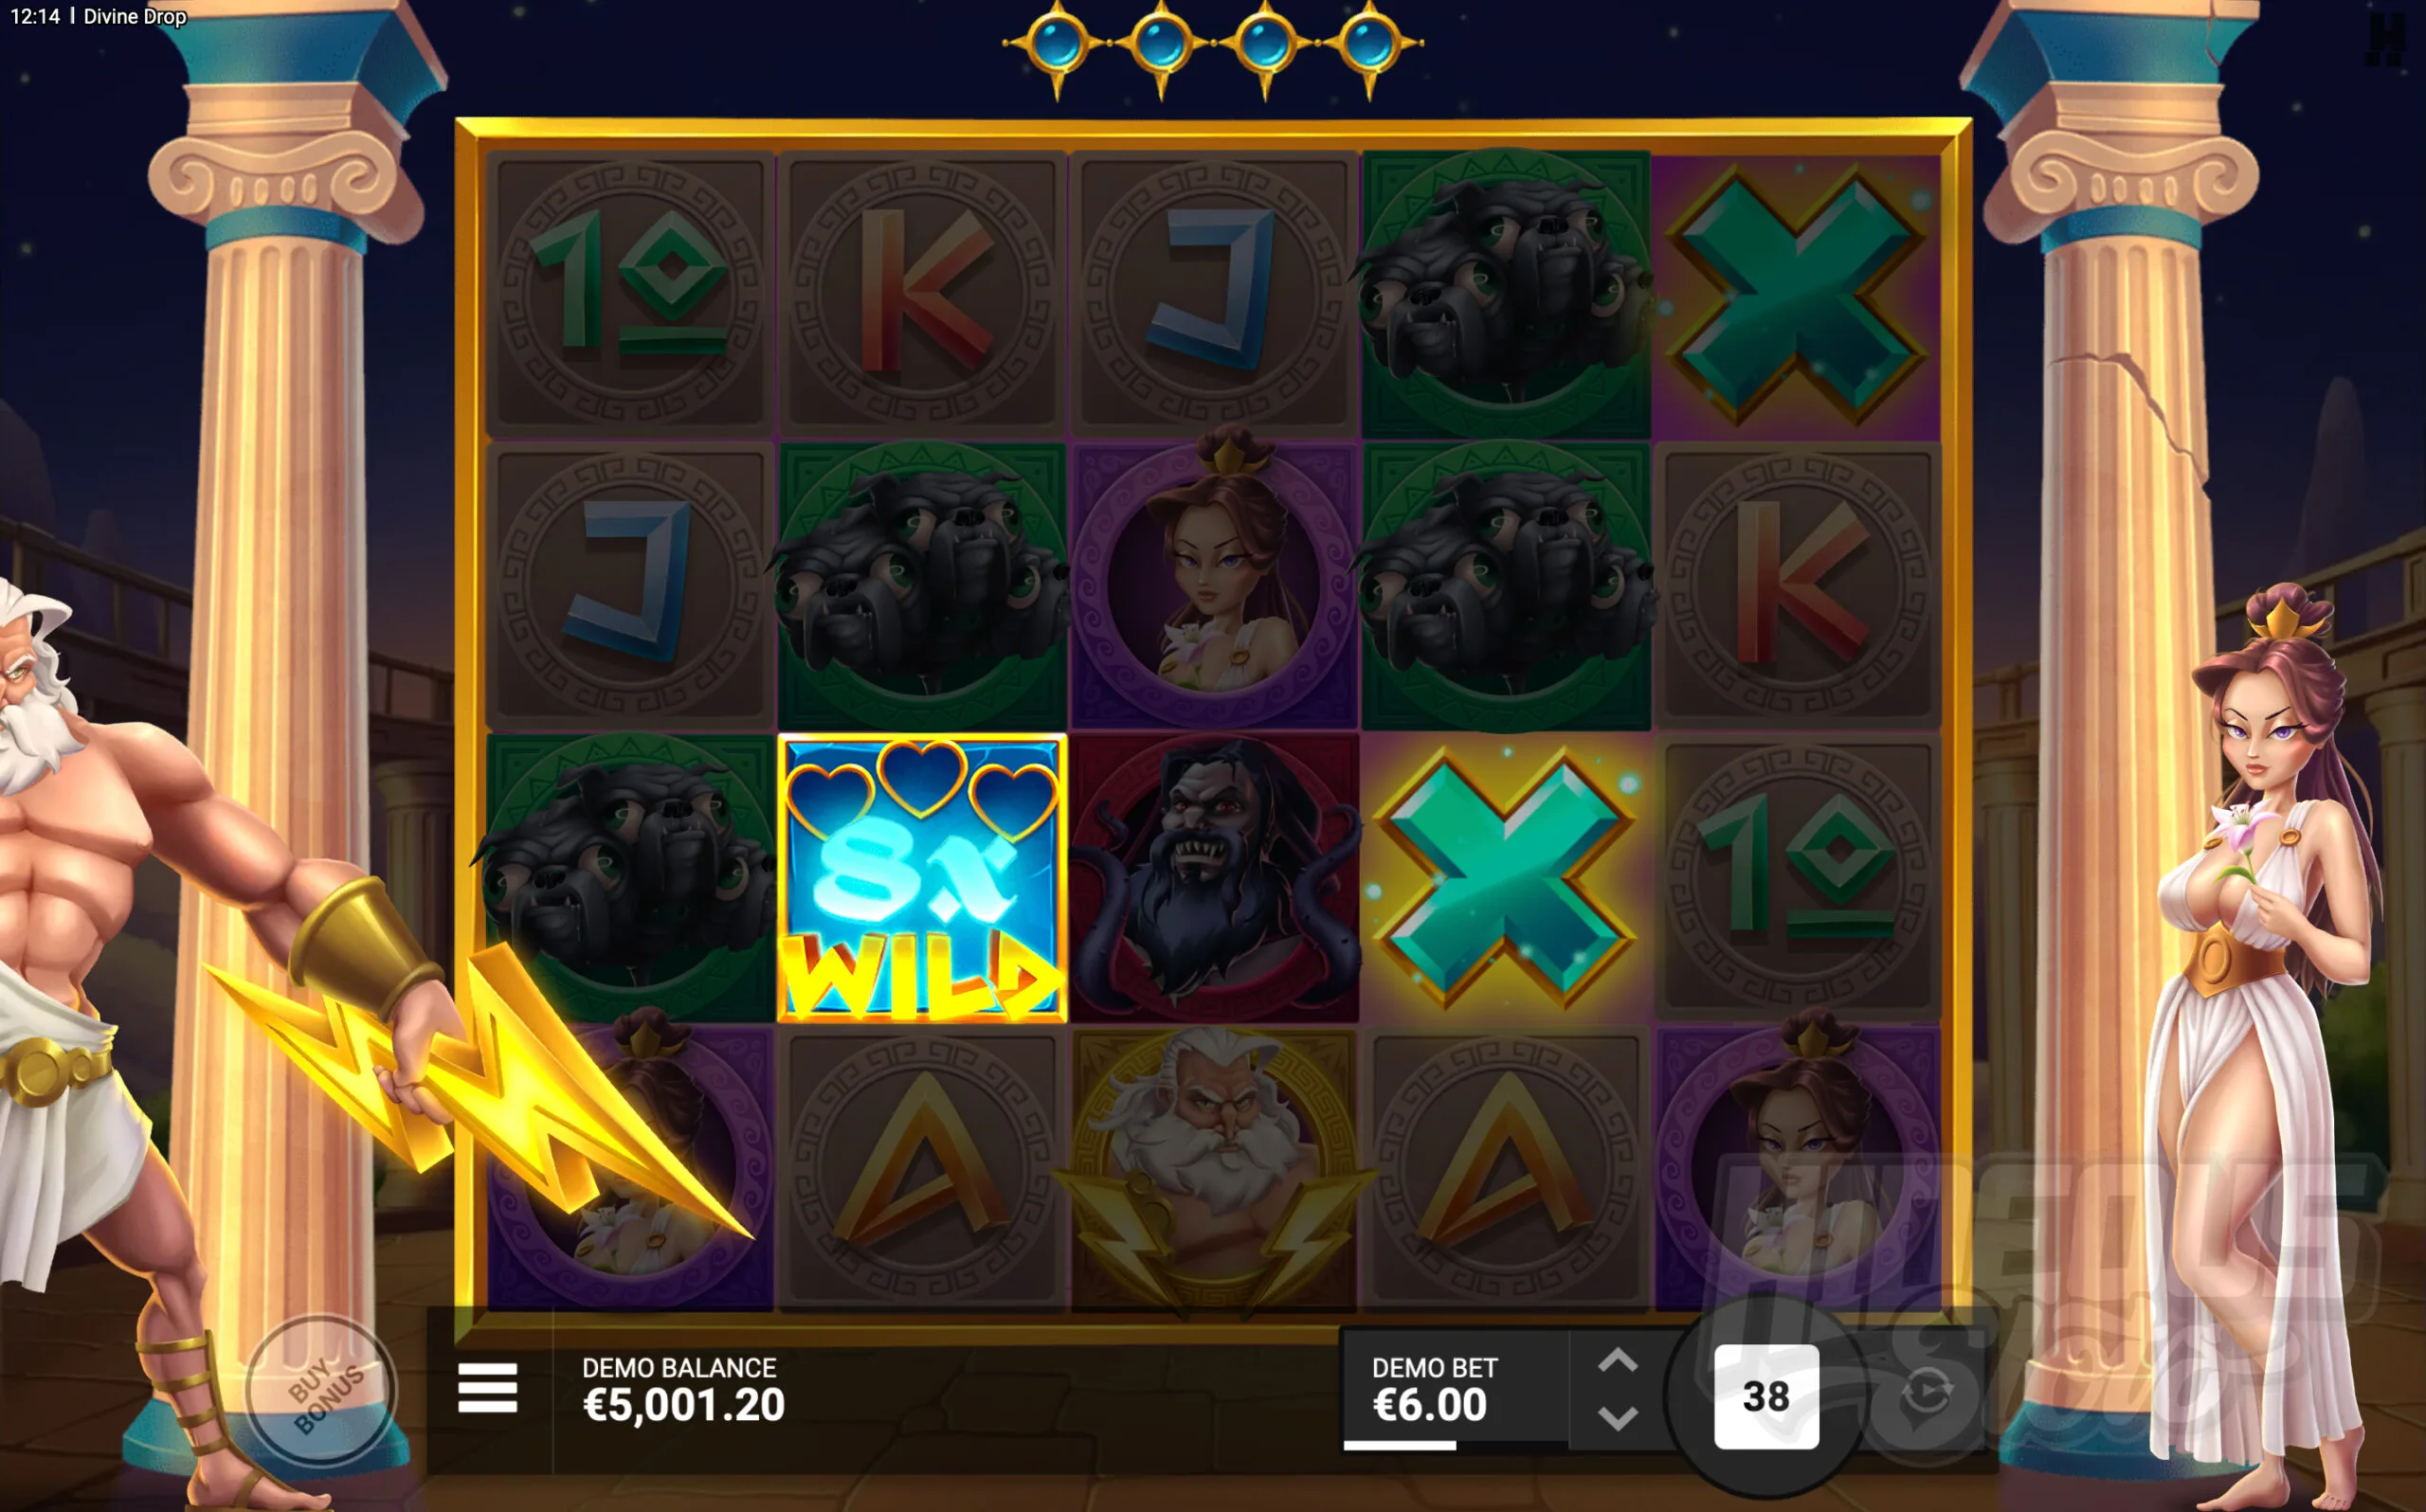 Zeus's Thunder Doubles the Multiplier Value of all Wild Multiplier Symbols in View